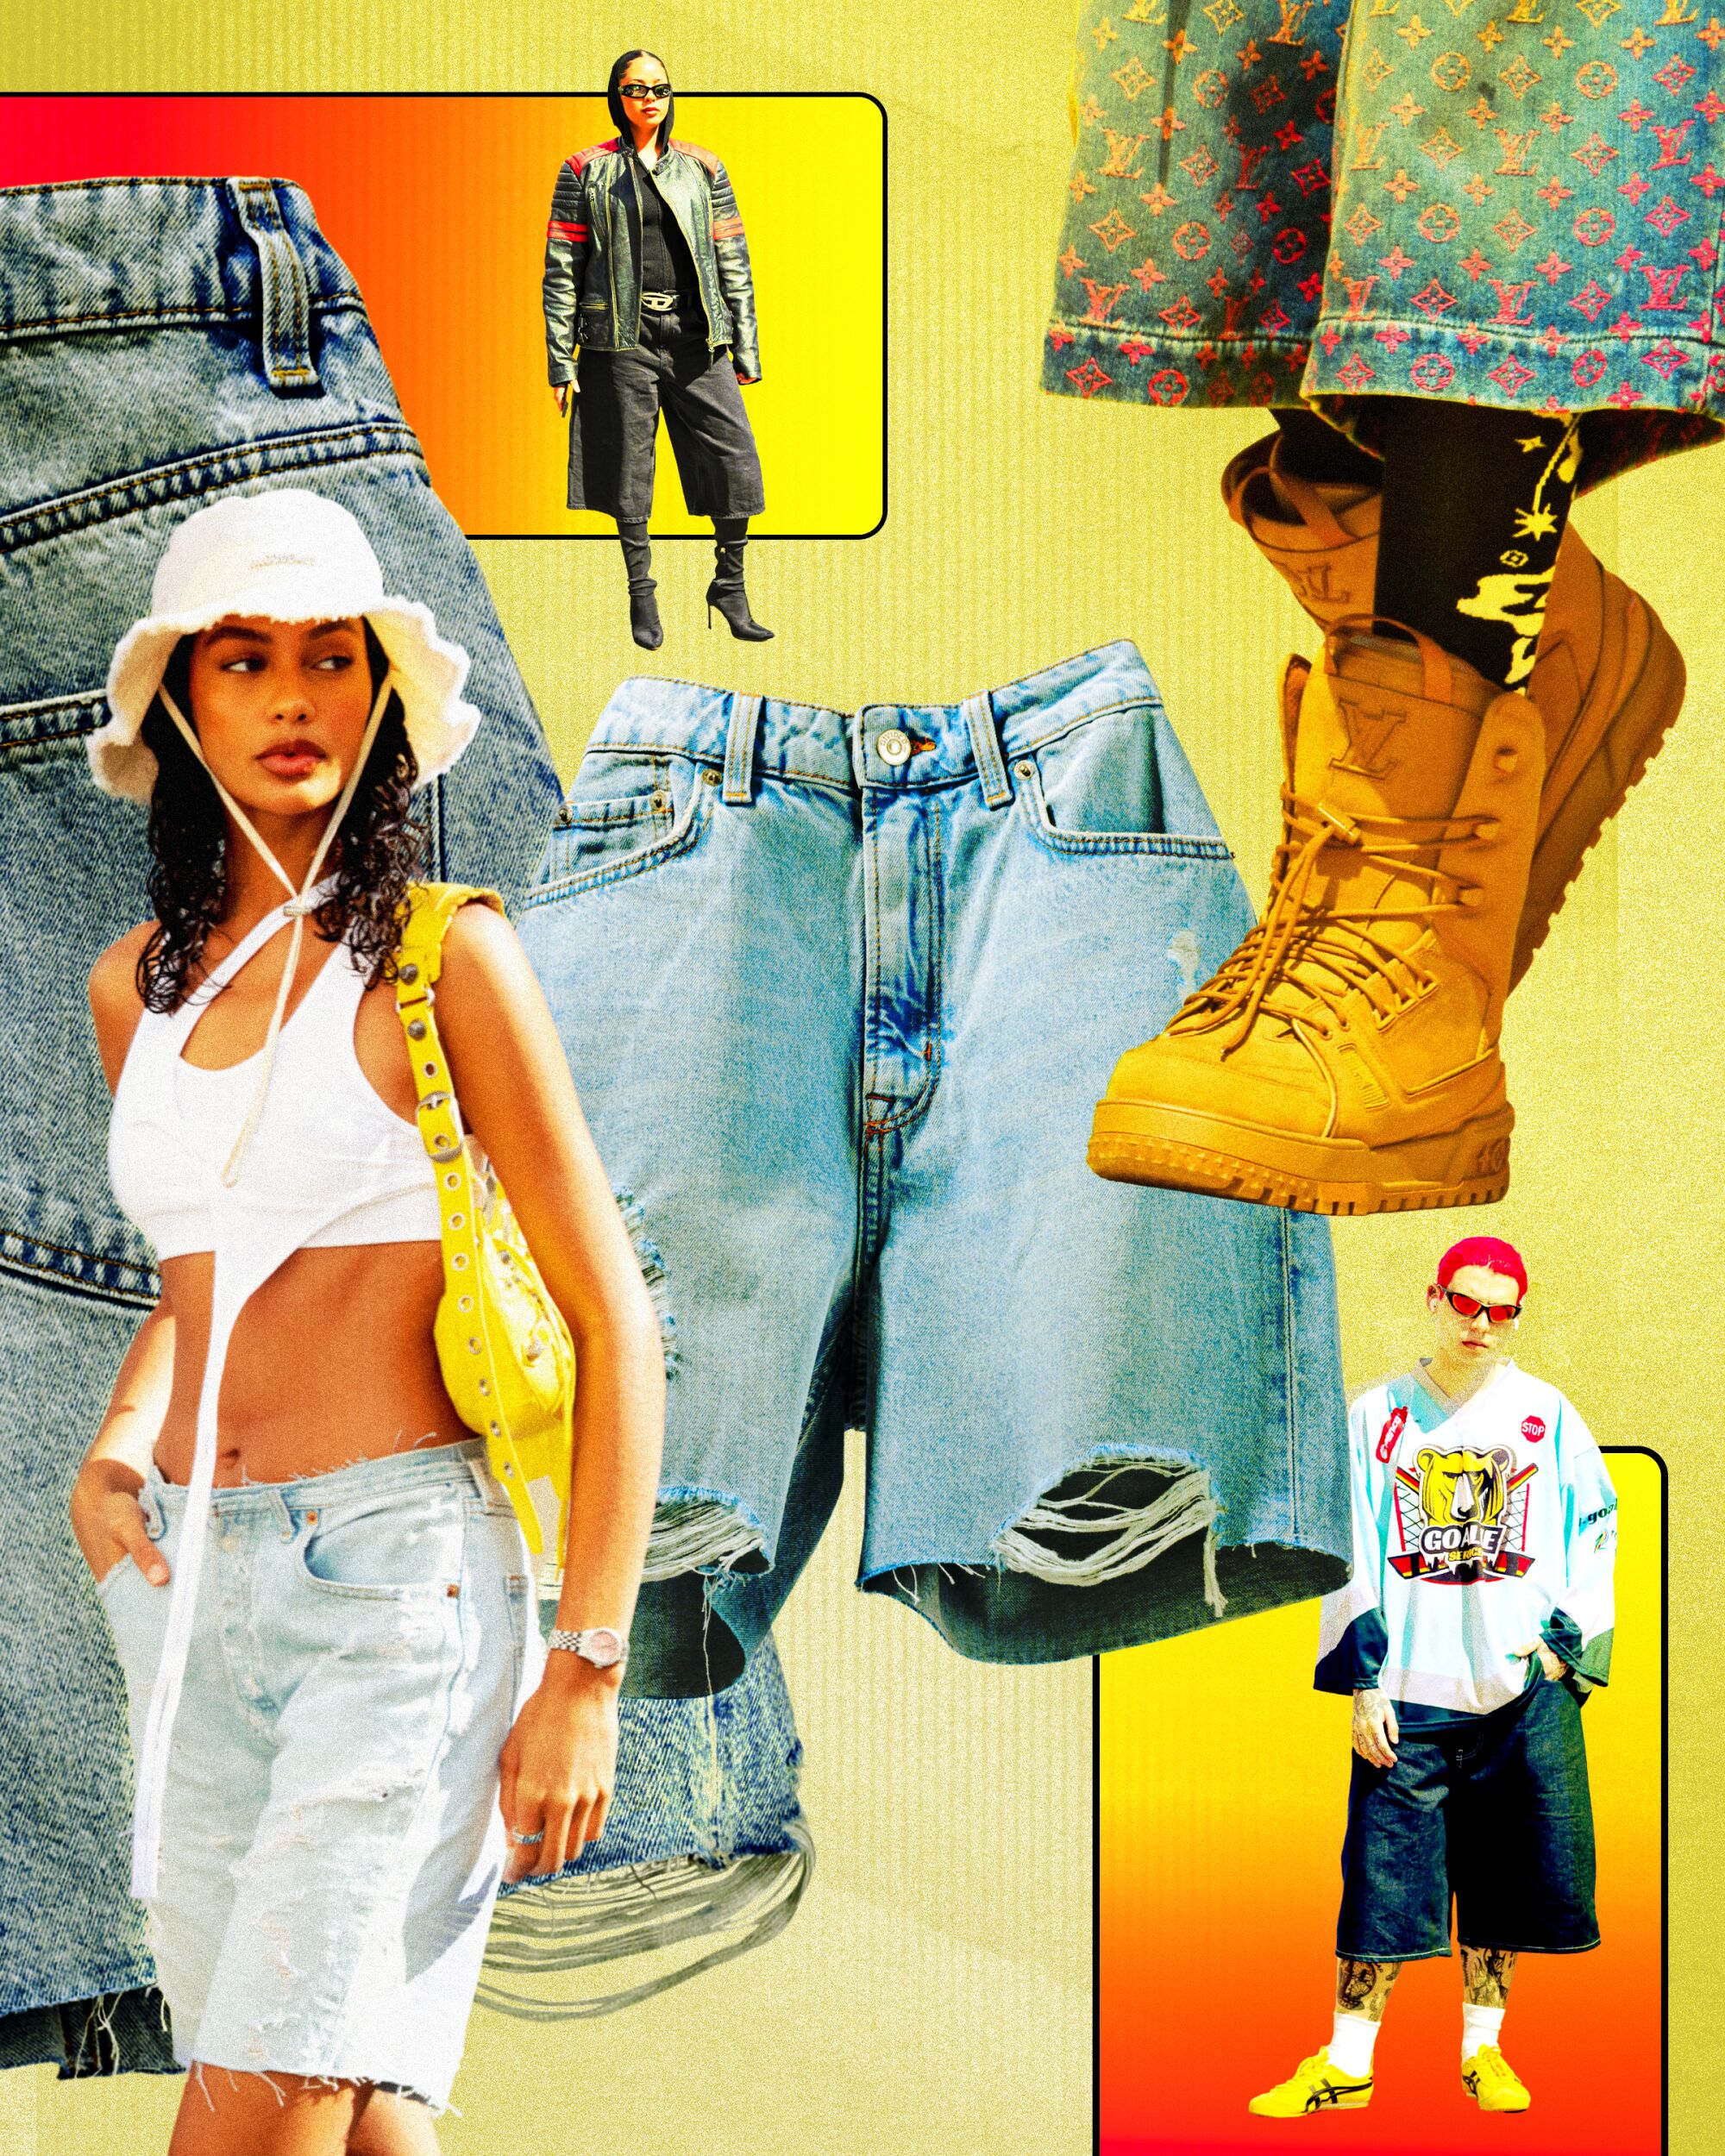 collage of fashion images featuring jorts on a warm, saturated background